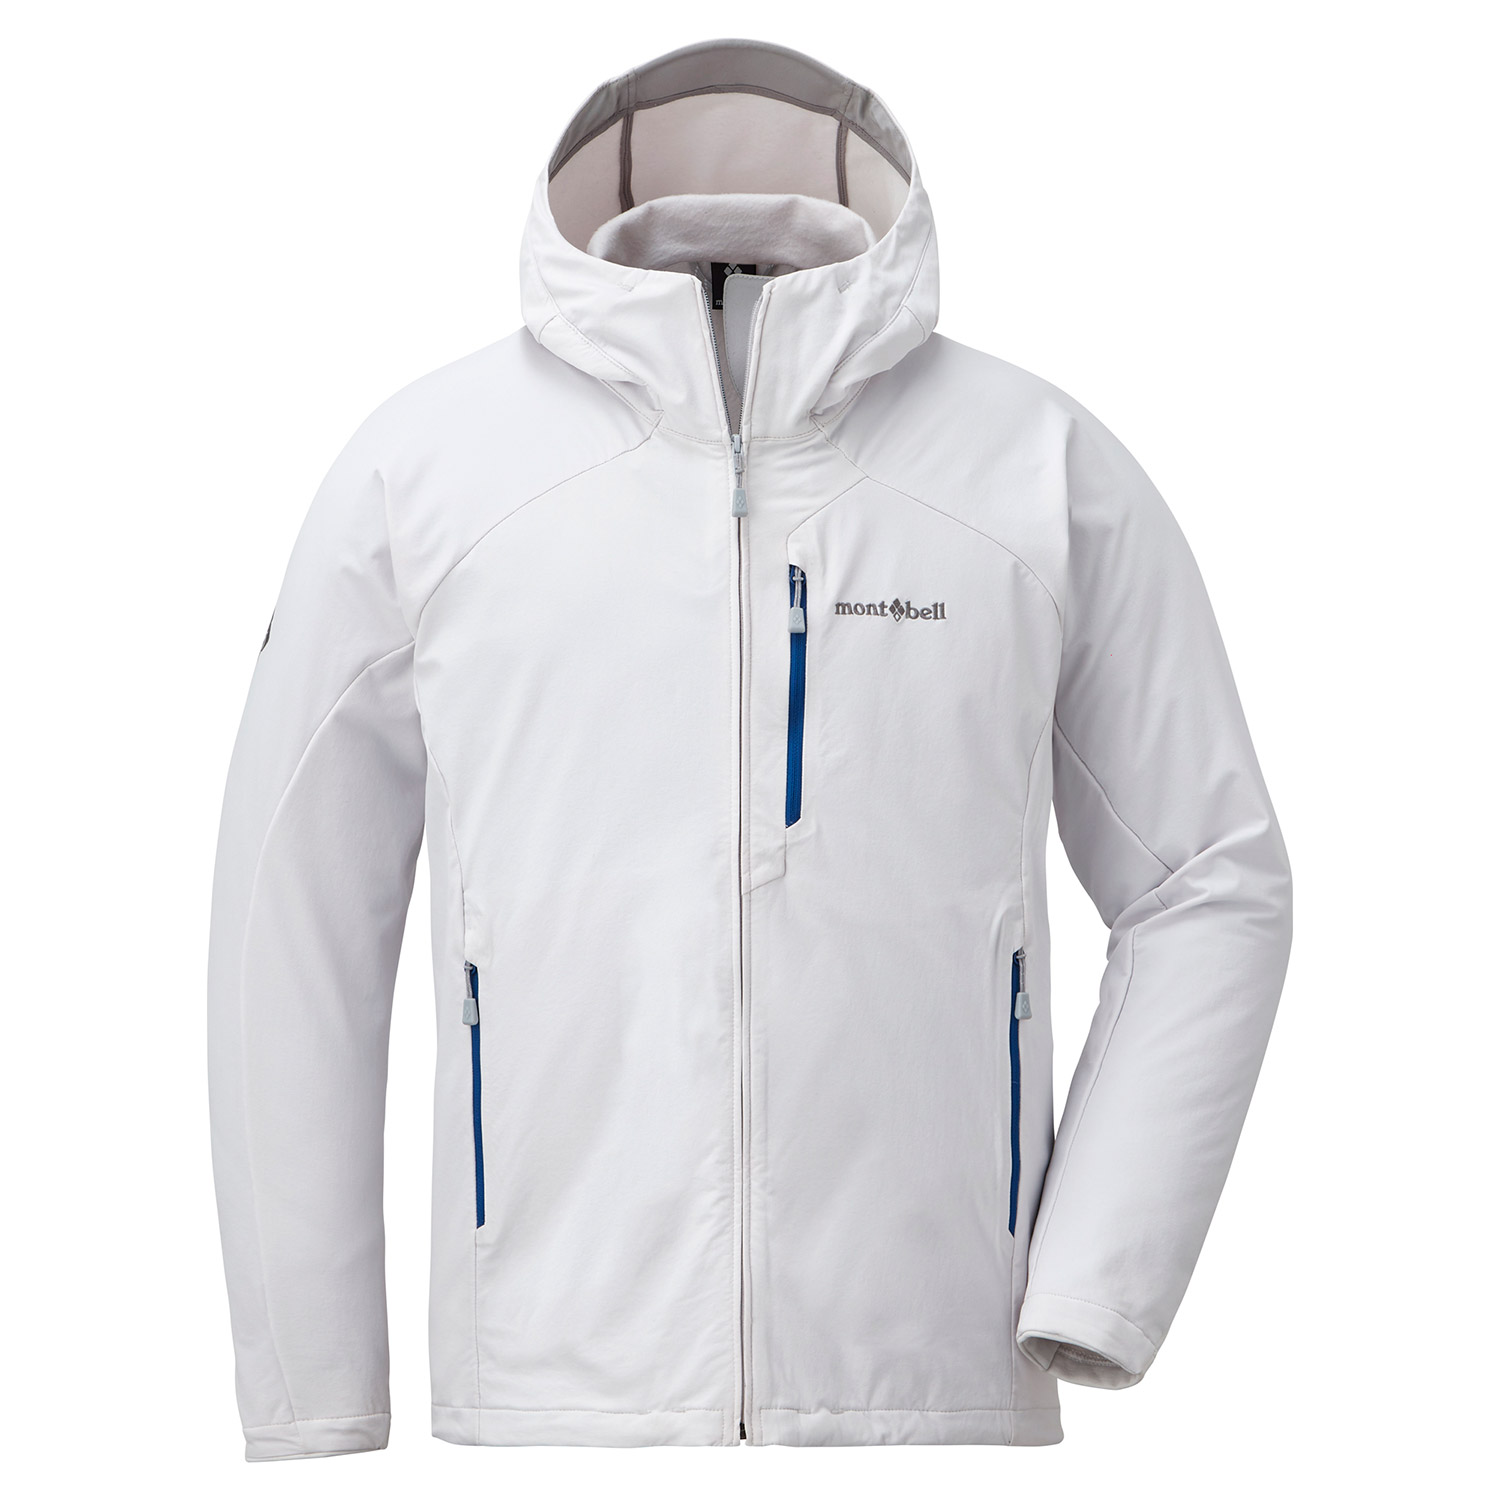 CLIMAPRO 200 Hooded Jacket Men's | Montbell America